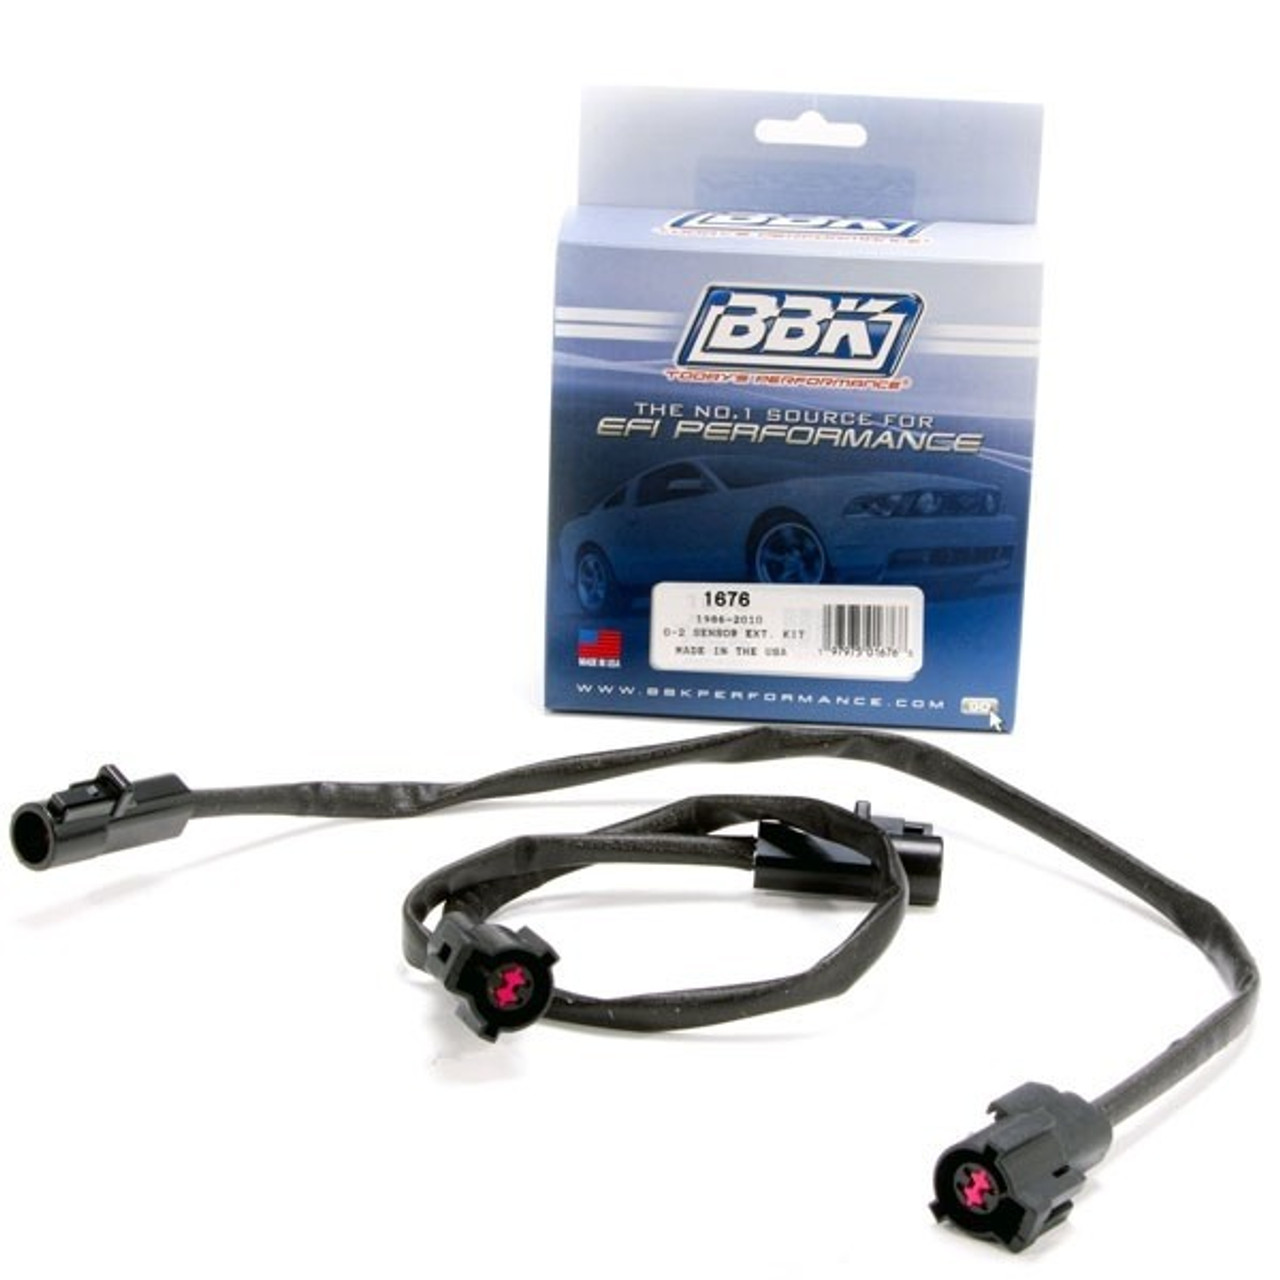 Ford BBK O2 Sensor 4 Wire Harness Extensions - Pair (86-10)